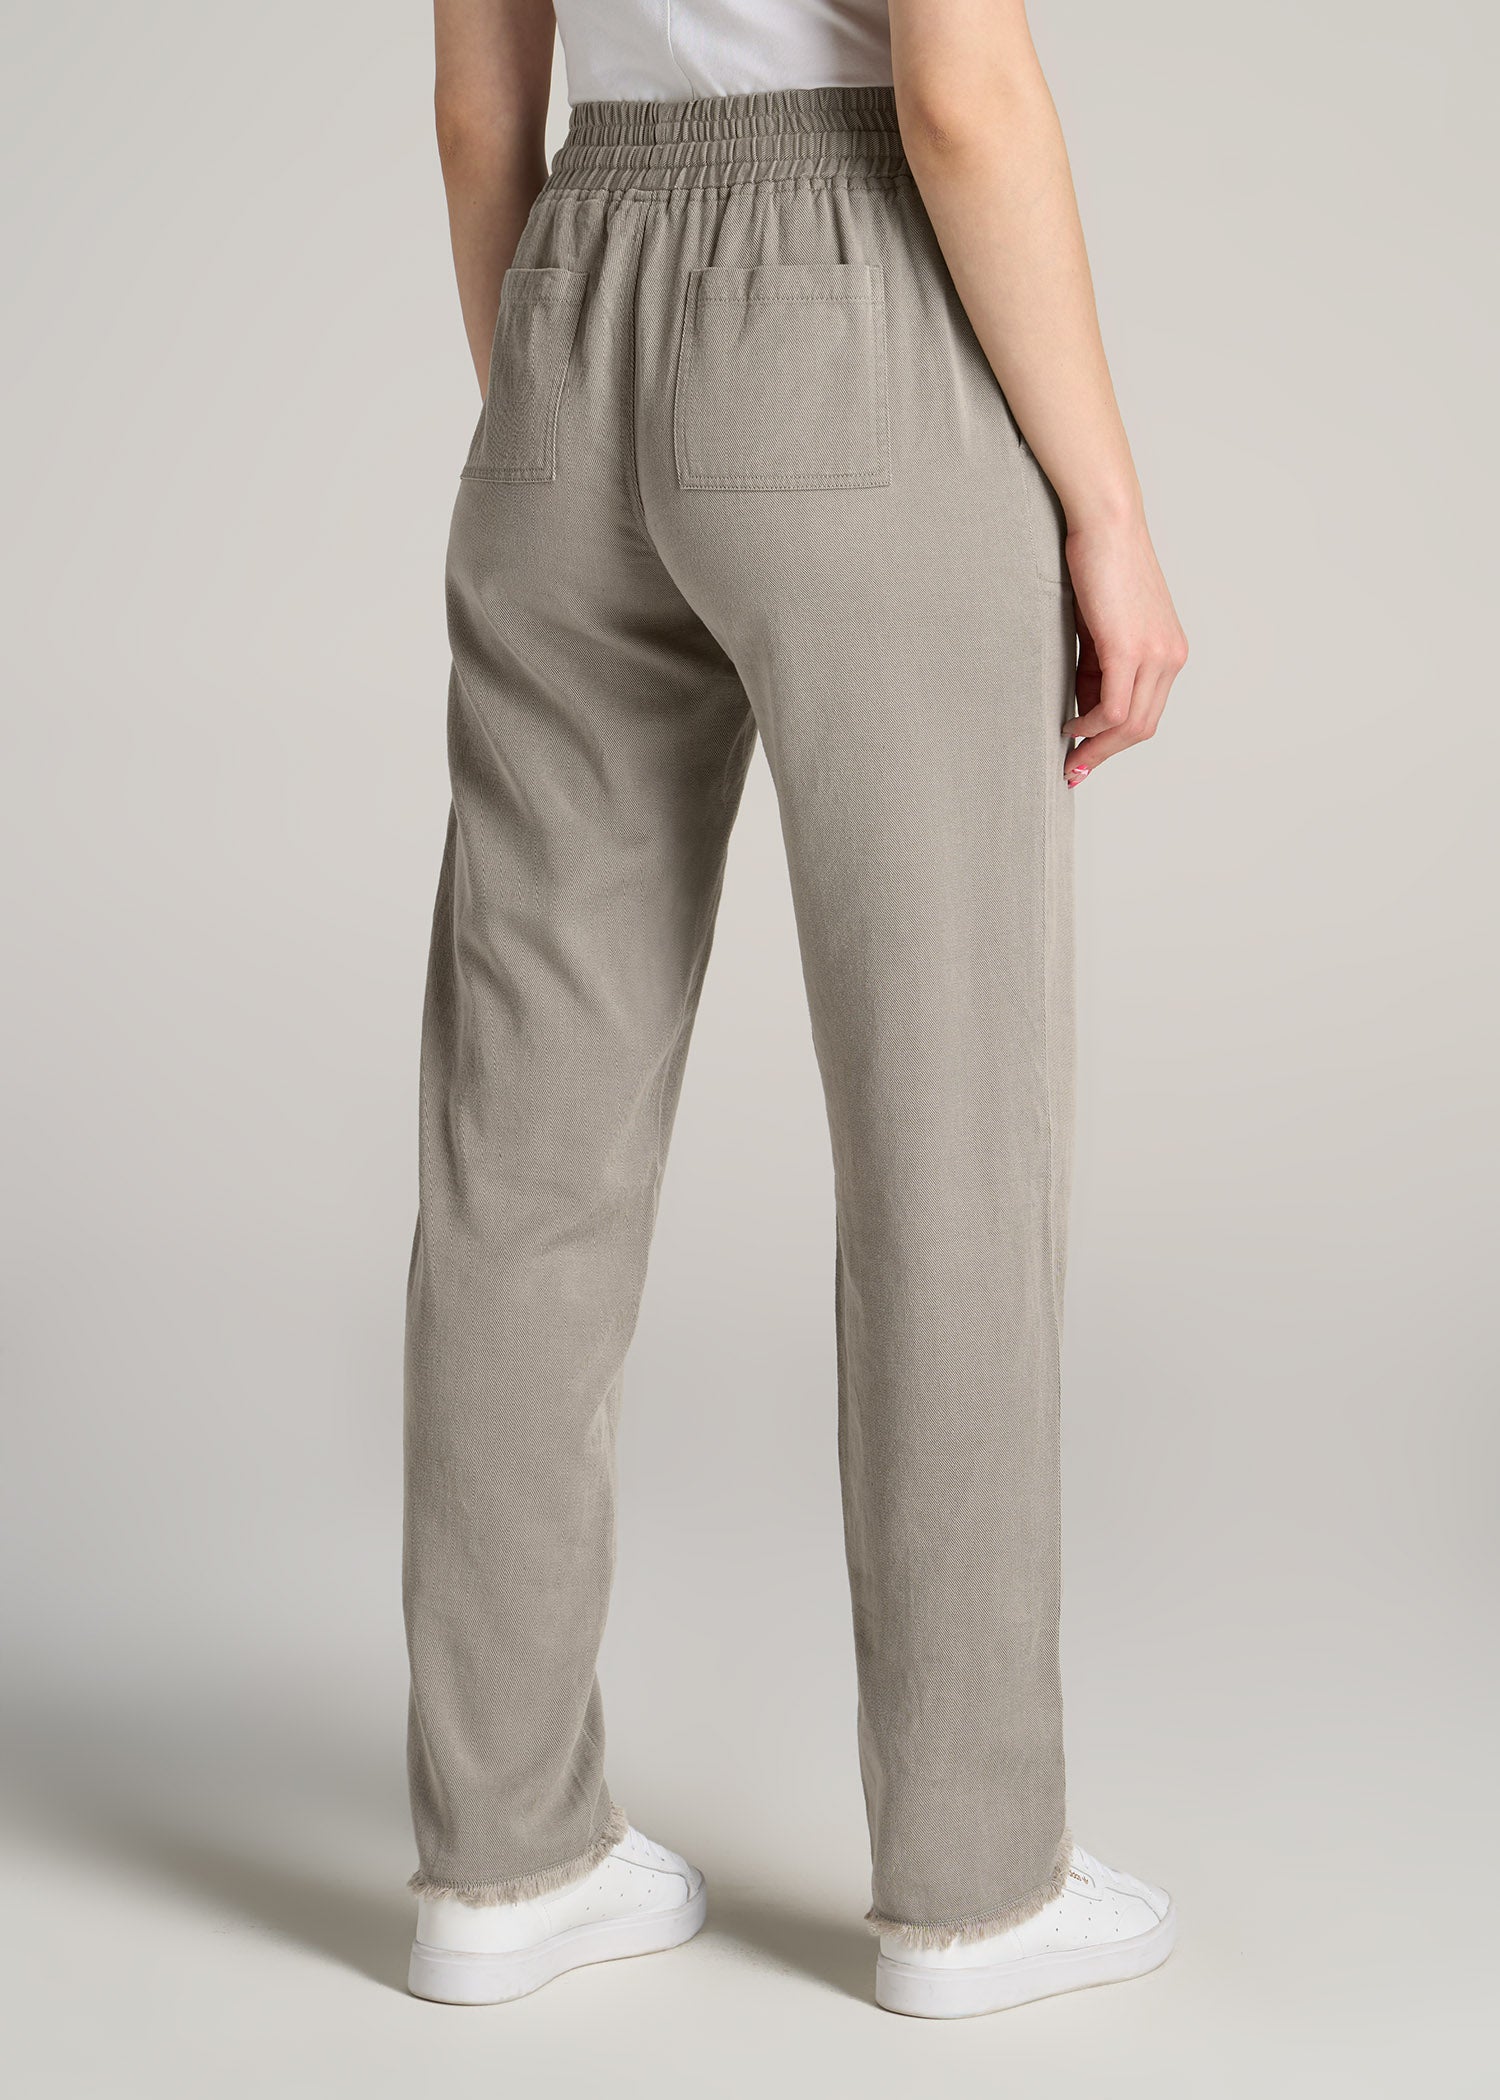    American-Tall-Women-Patch-Pocket-Twill-Pants-Taupe-Grey-back